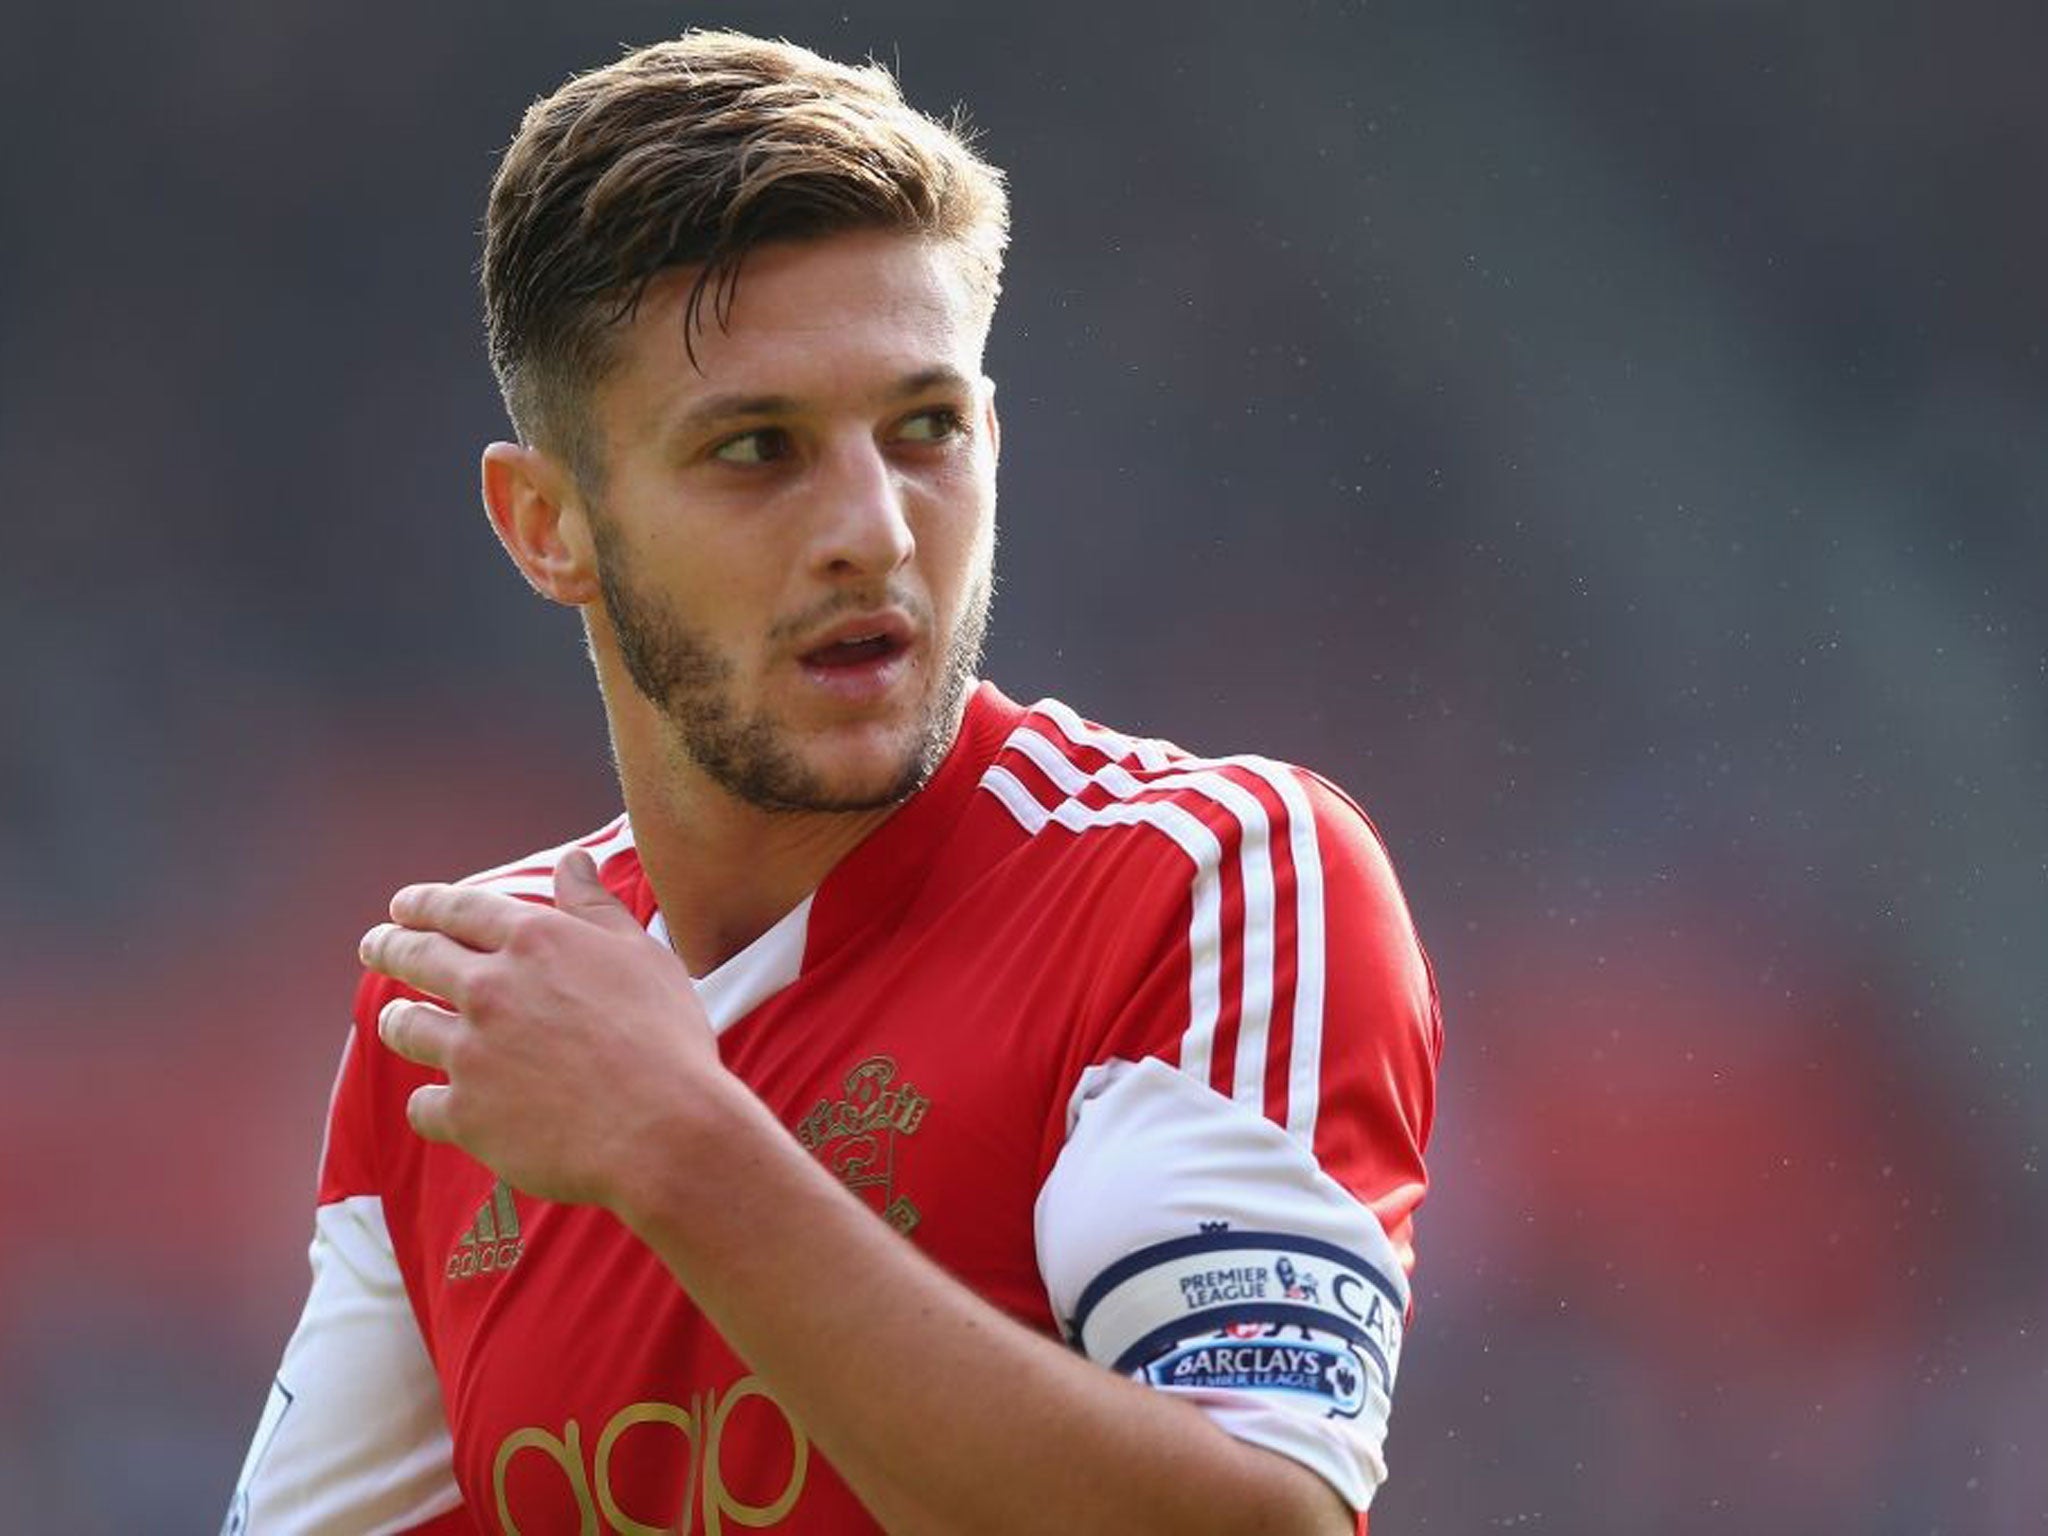 Adam Lallana was prepared for Southampton's occupying a champions' League spot last week